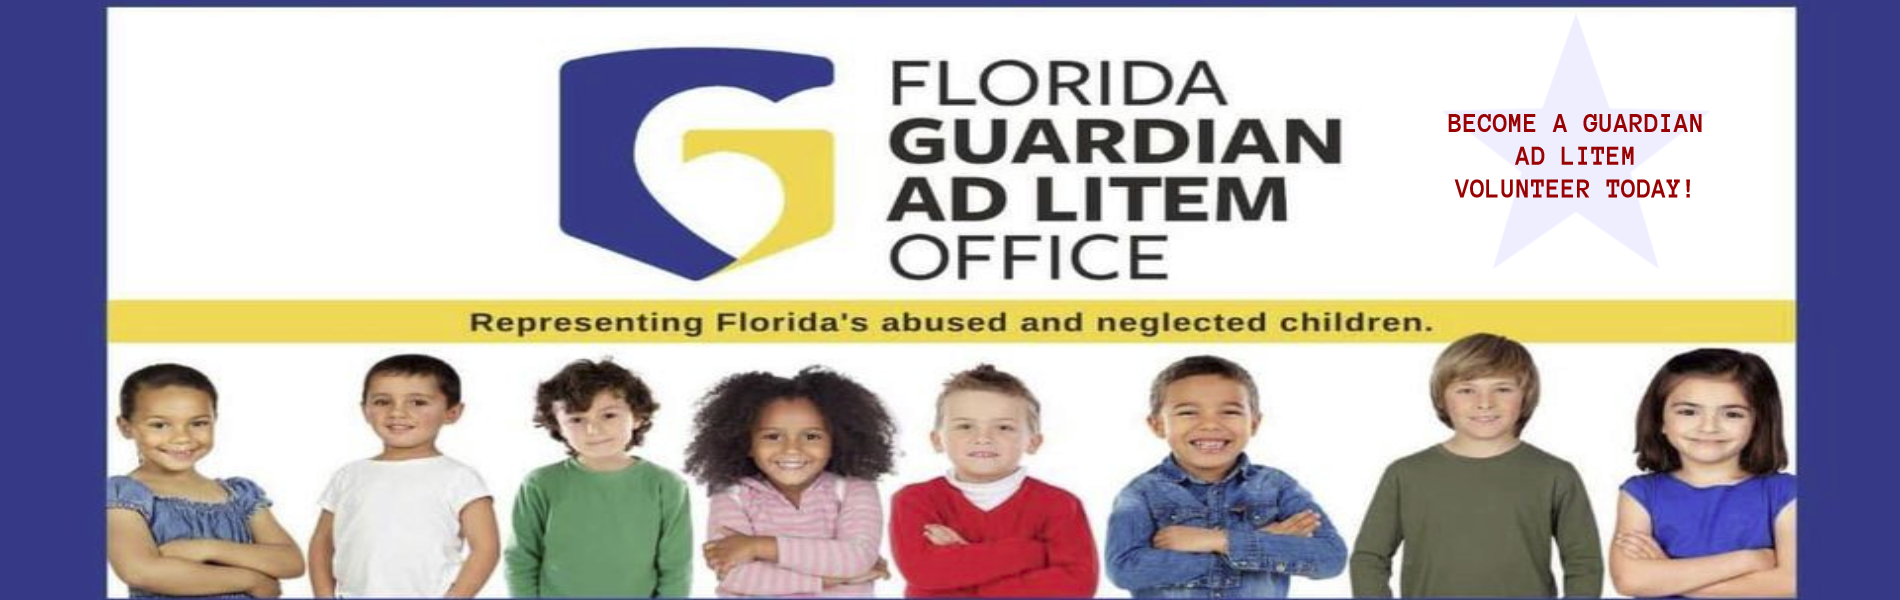 BECOME A GUARDIAN AD LITEM VOLUNTEER TODAY!